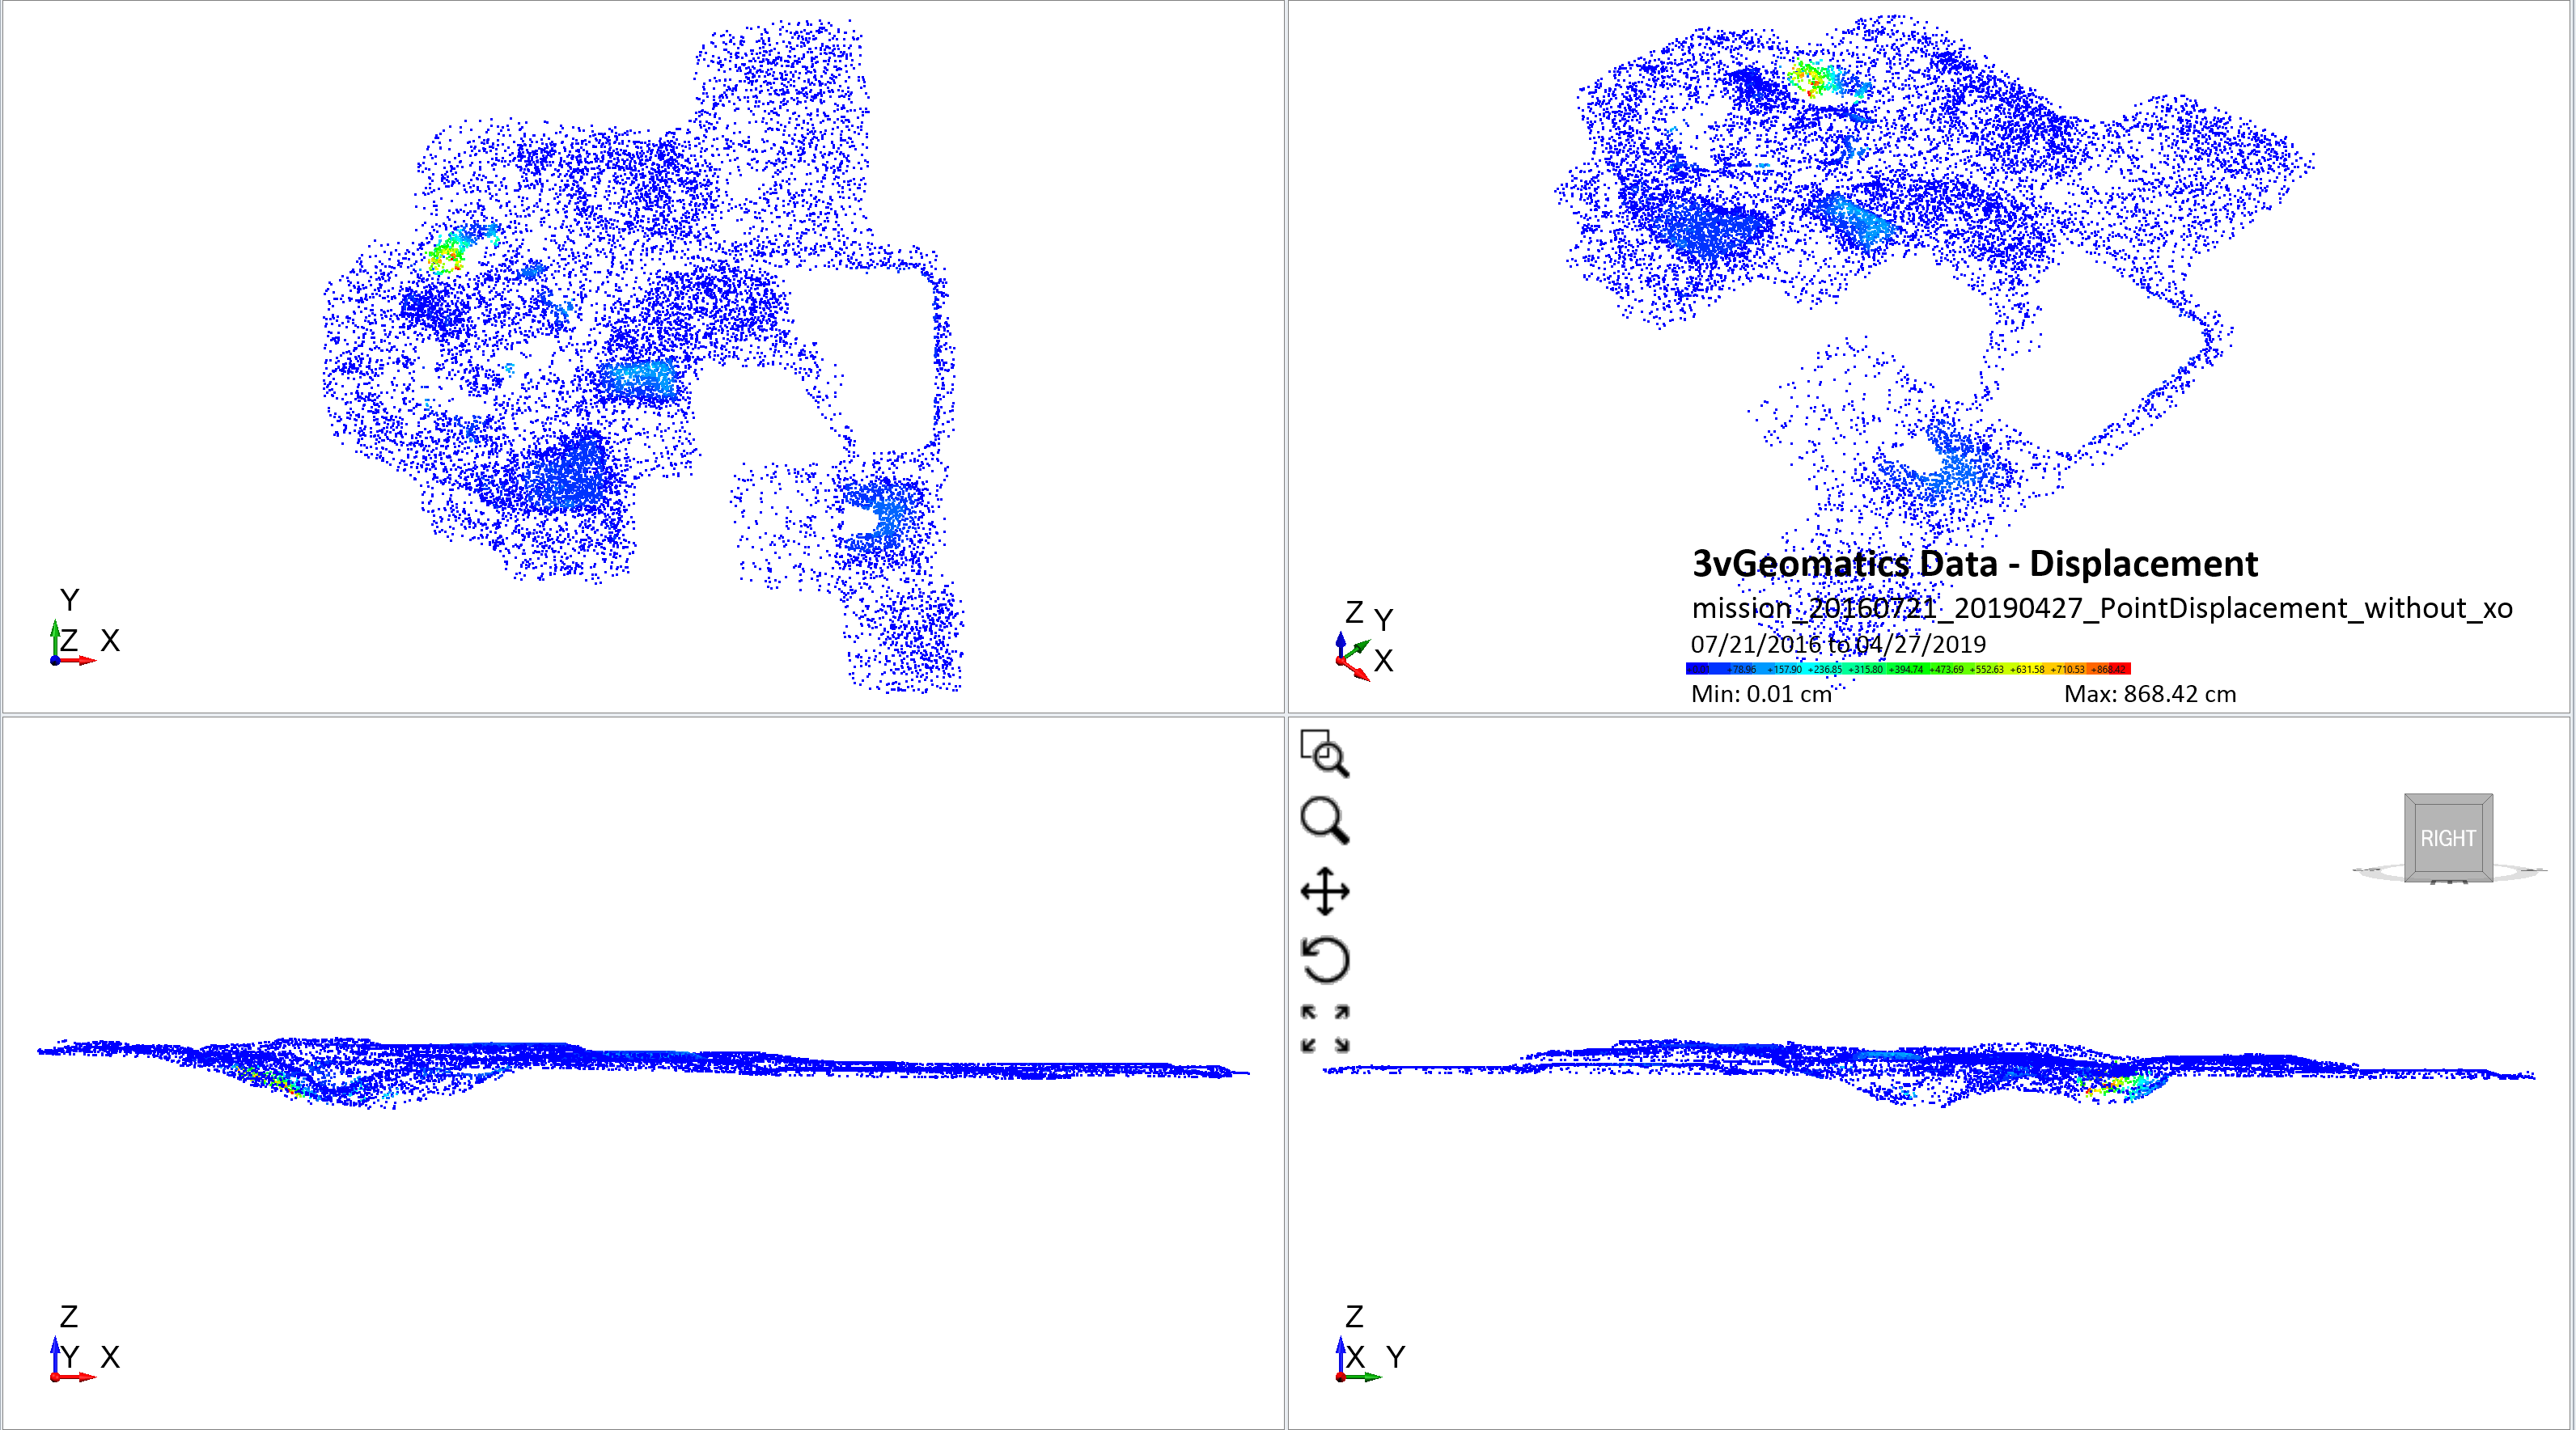 Example of imported 3vGeomatics displacement data